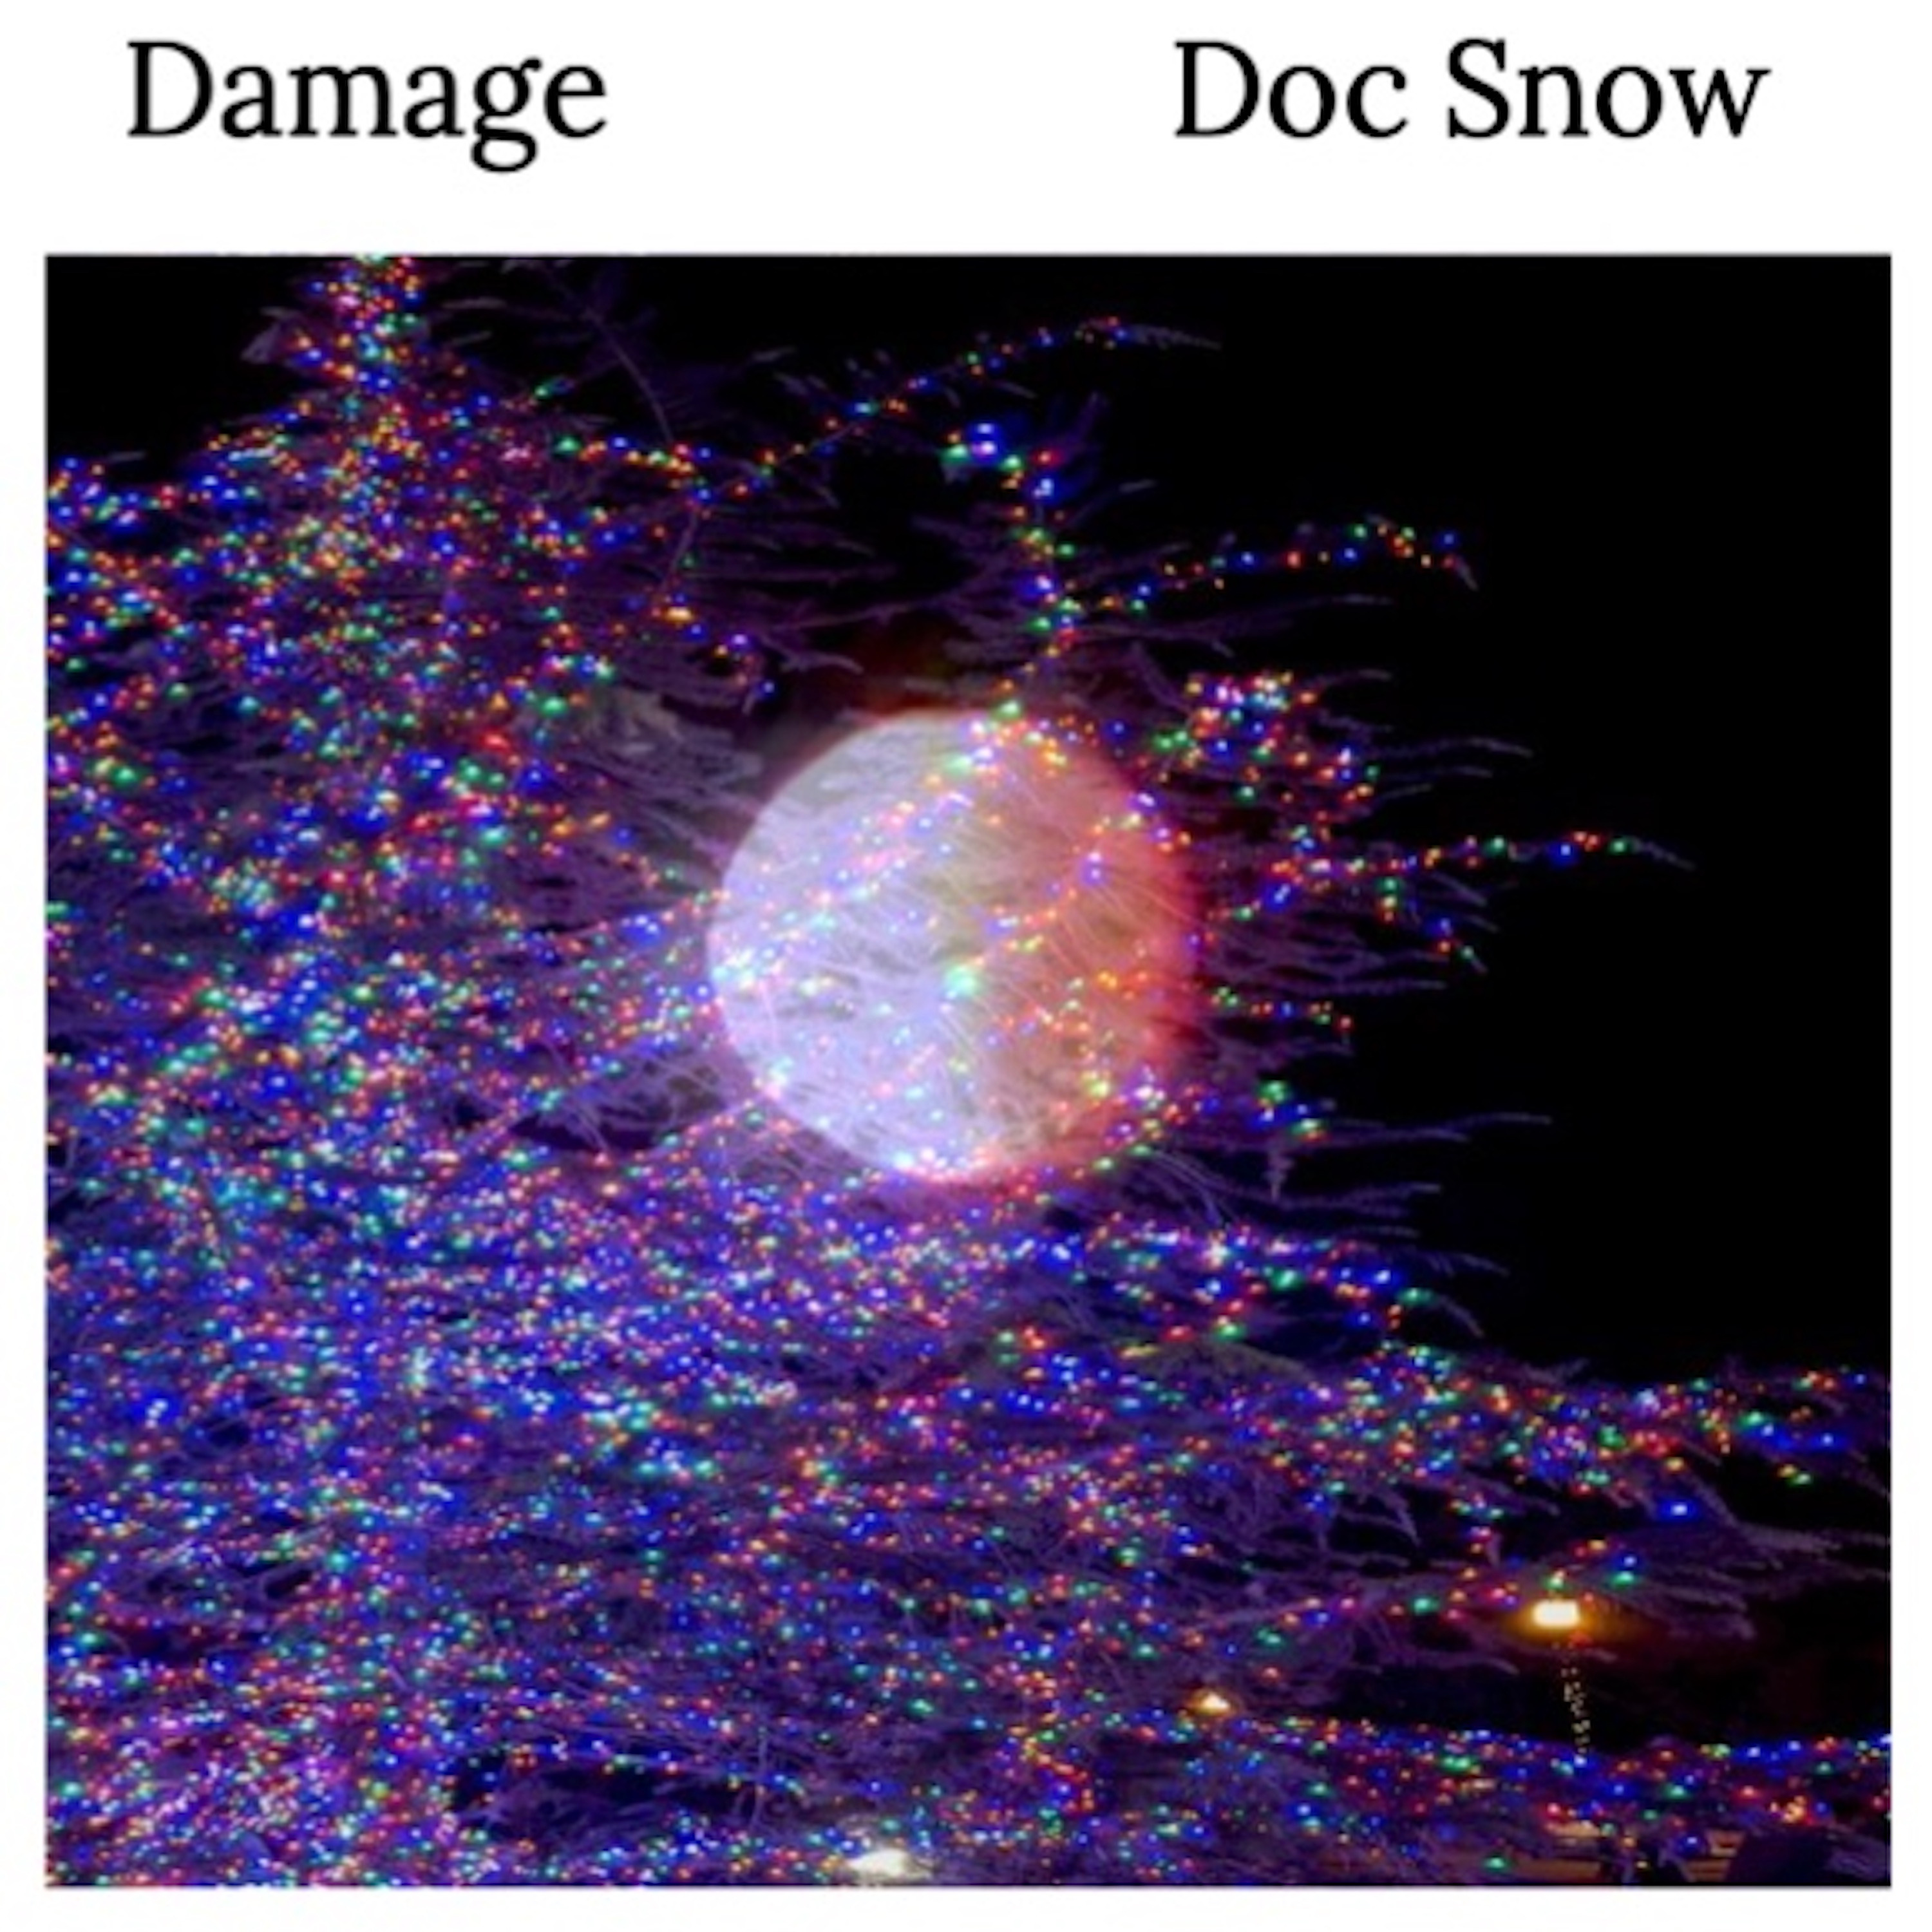 Scintillating Classical And Rock Music: Doc Snow Releases Music That Connects With The Hearts and Minds Of The Audience.